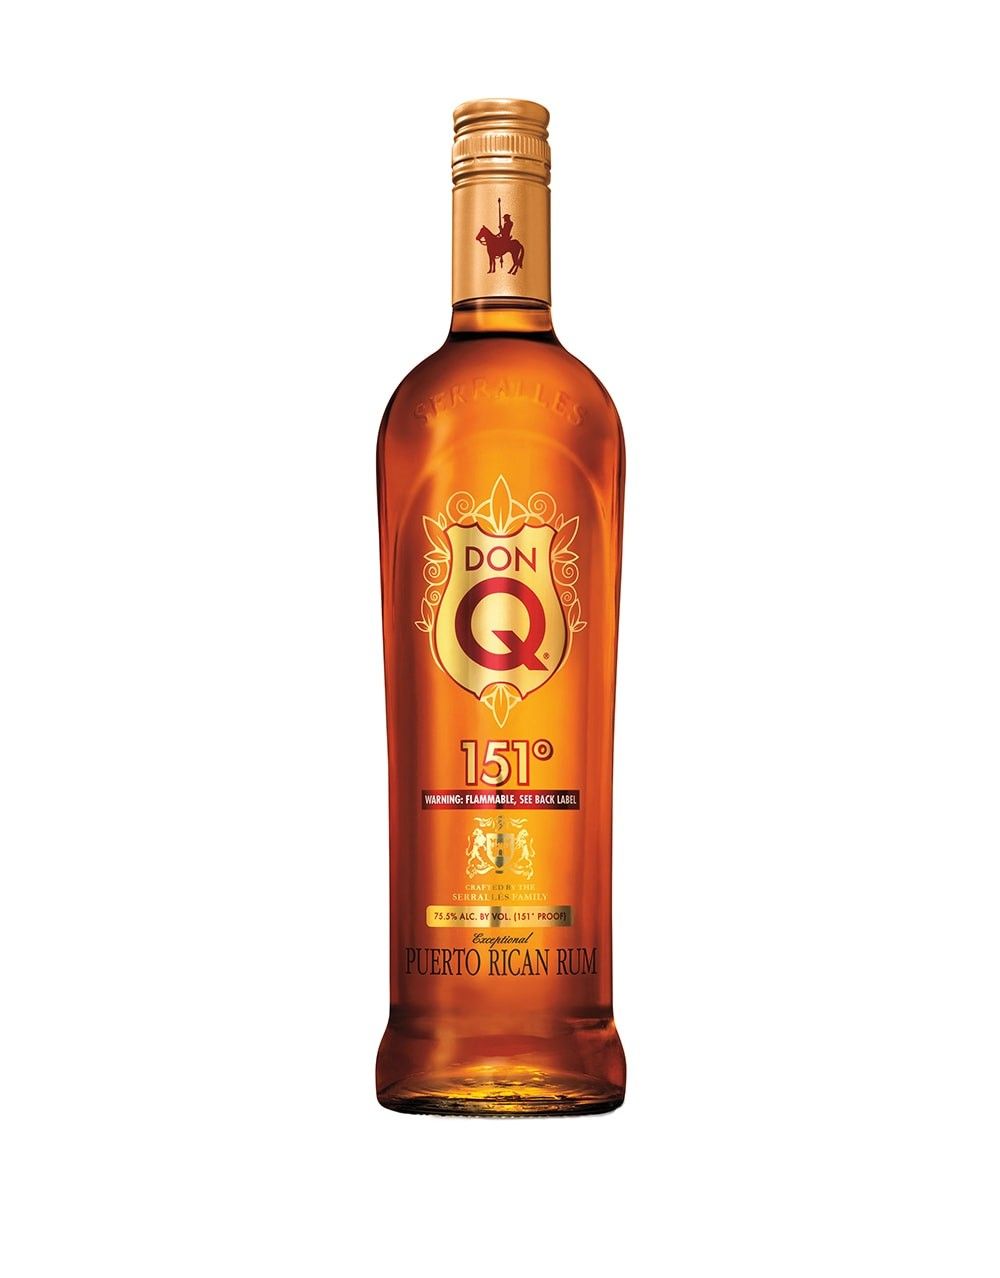 Don Q 151 Rum | Buy Online or Send as a Gift | ReserveBar